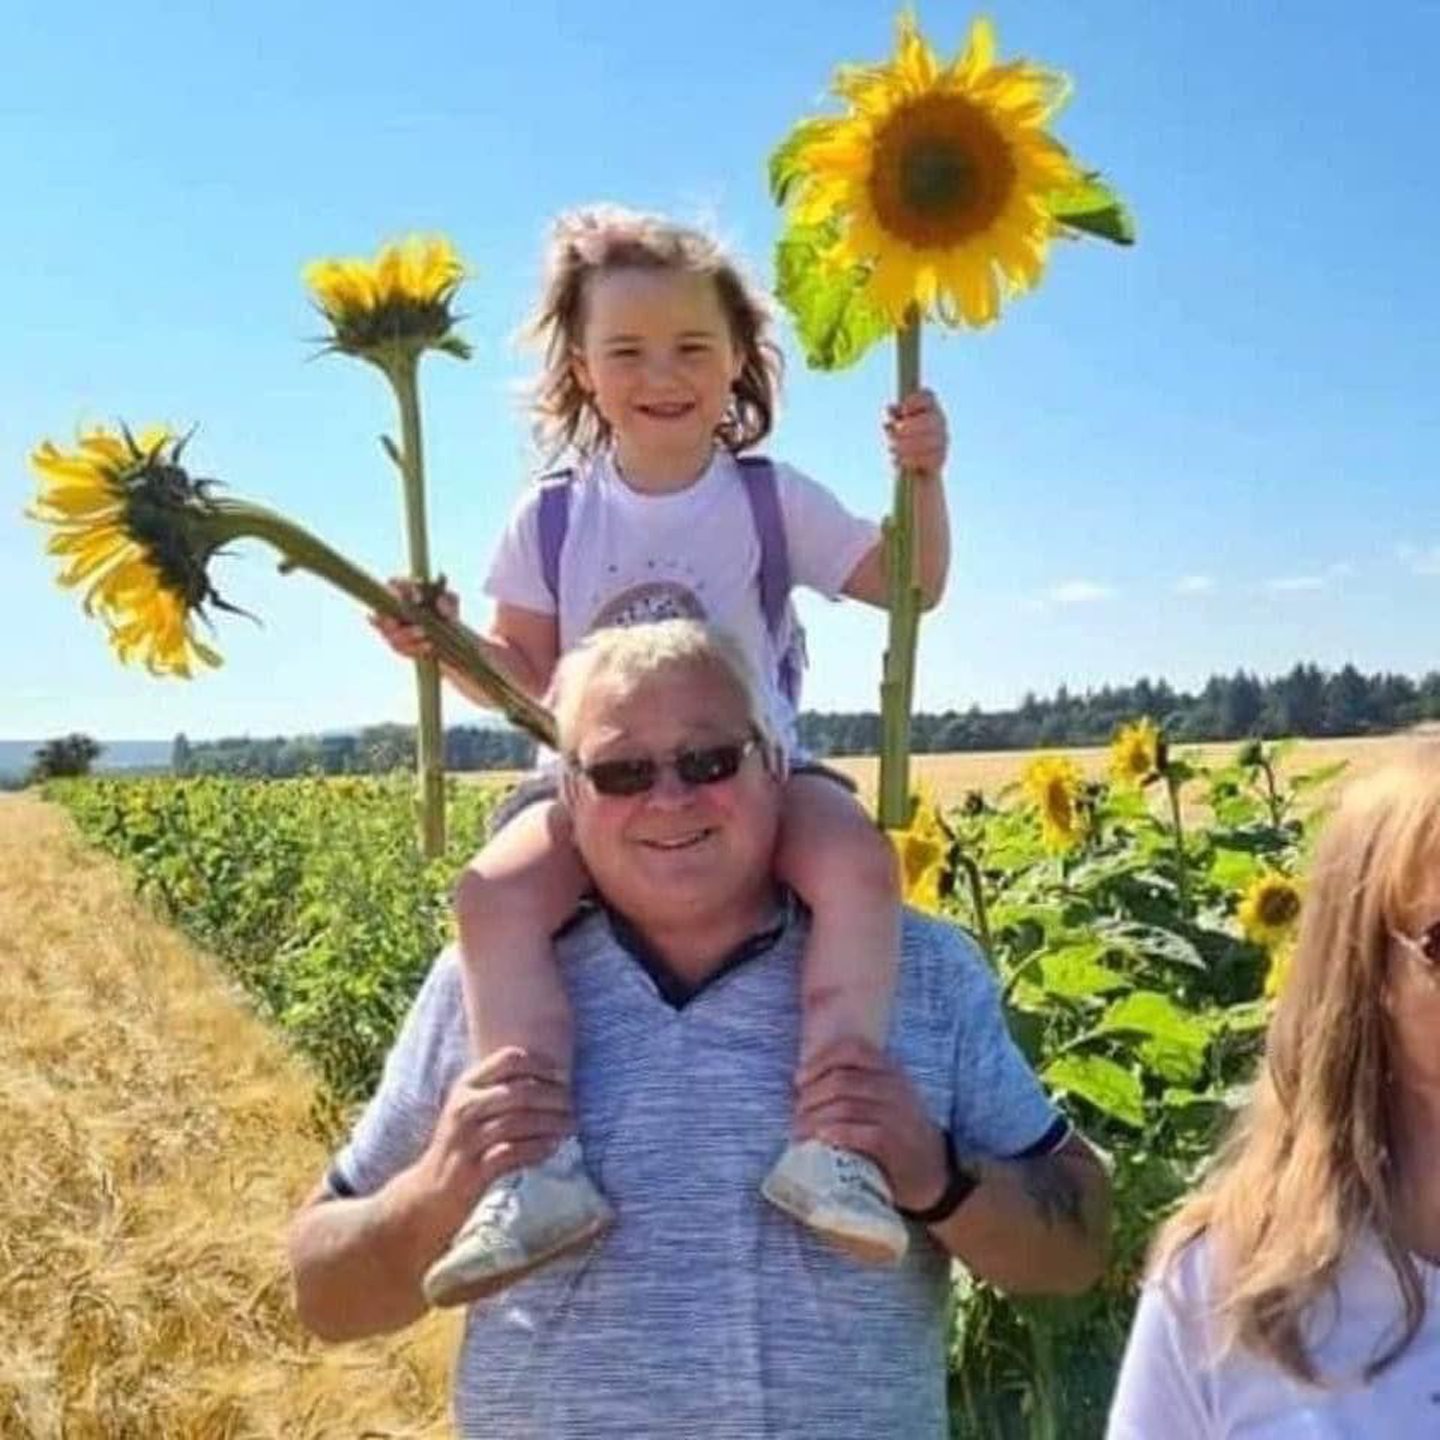 Tommy Neilson with a grandchild on his shoulders holding giant sunflowers